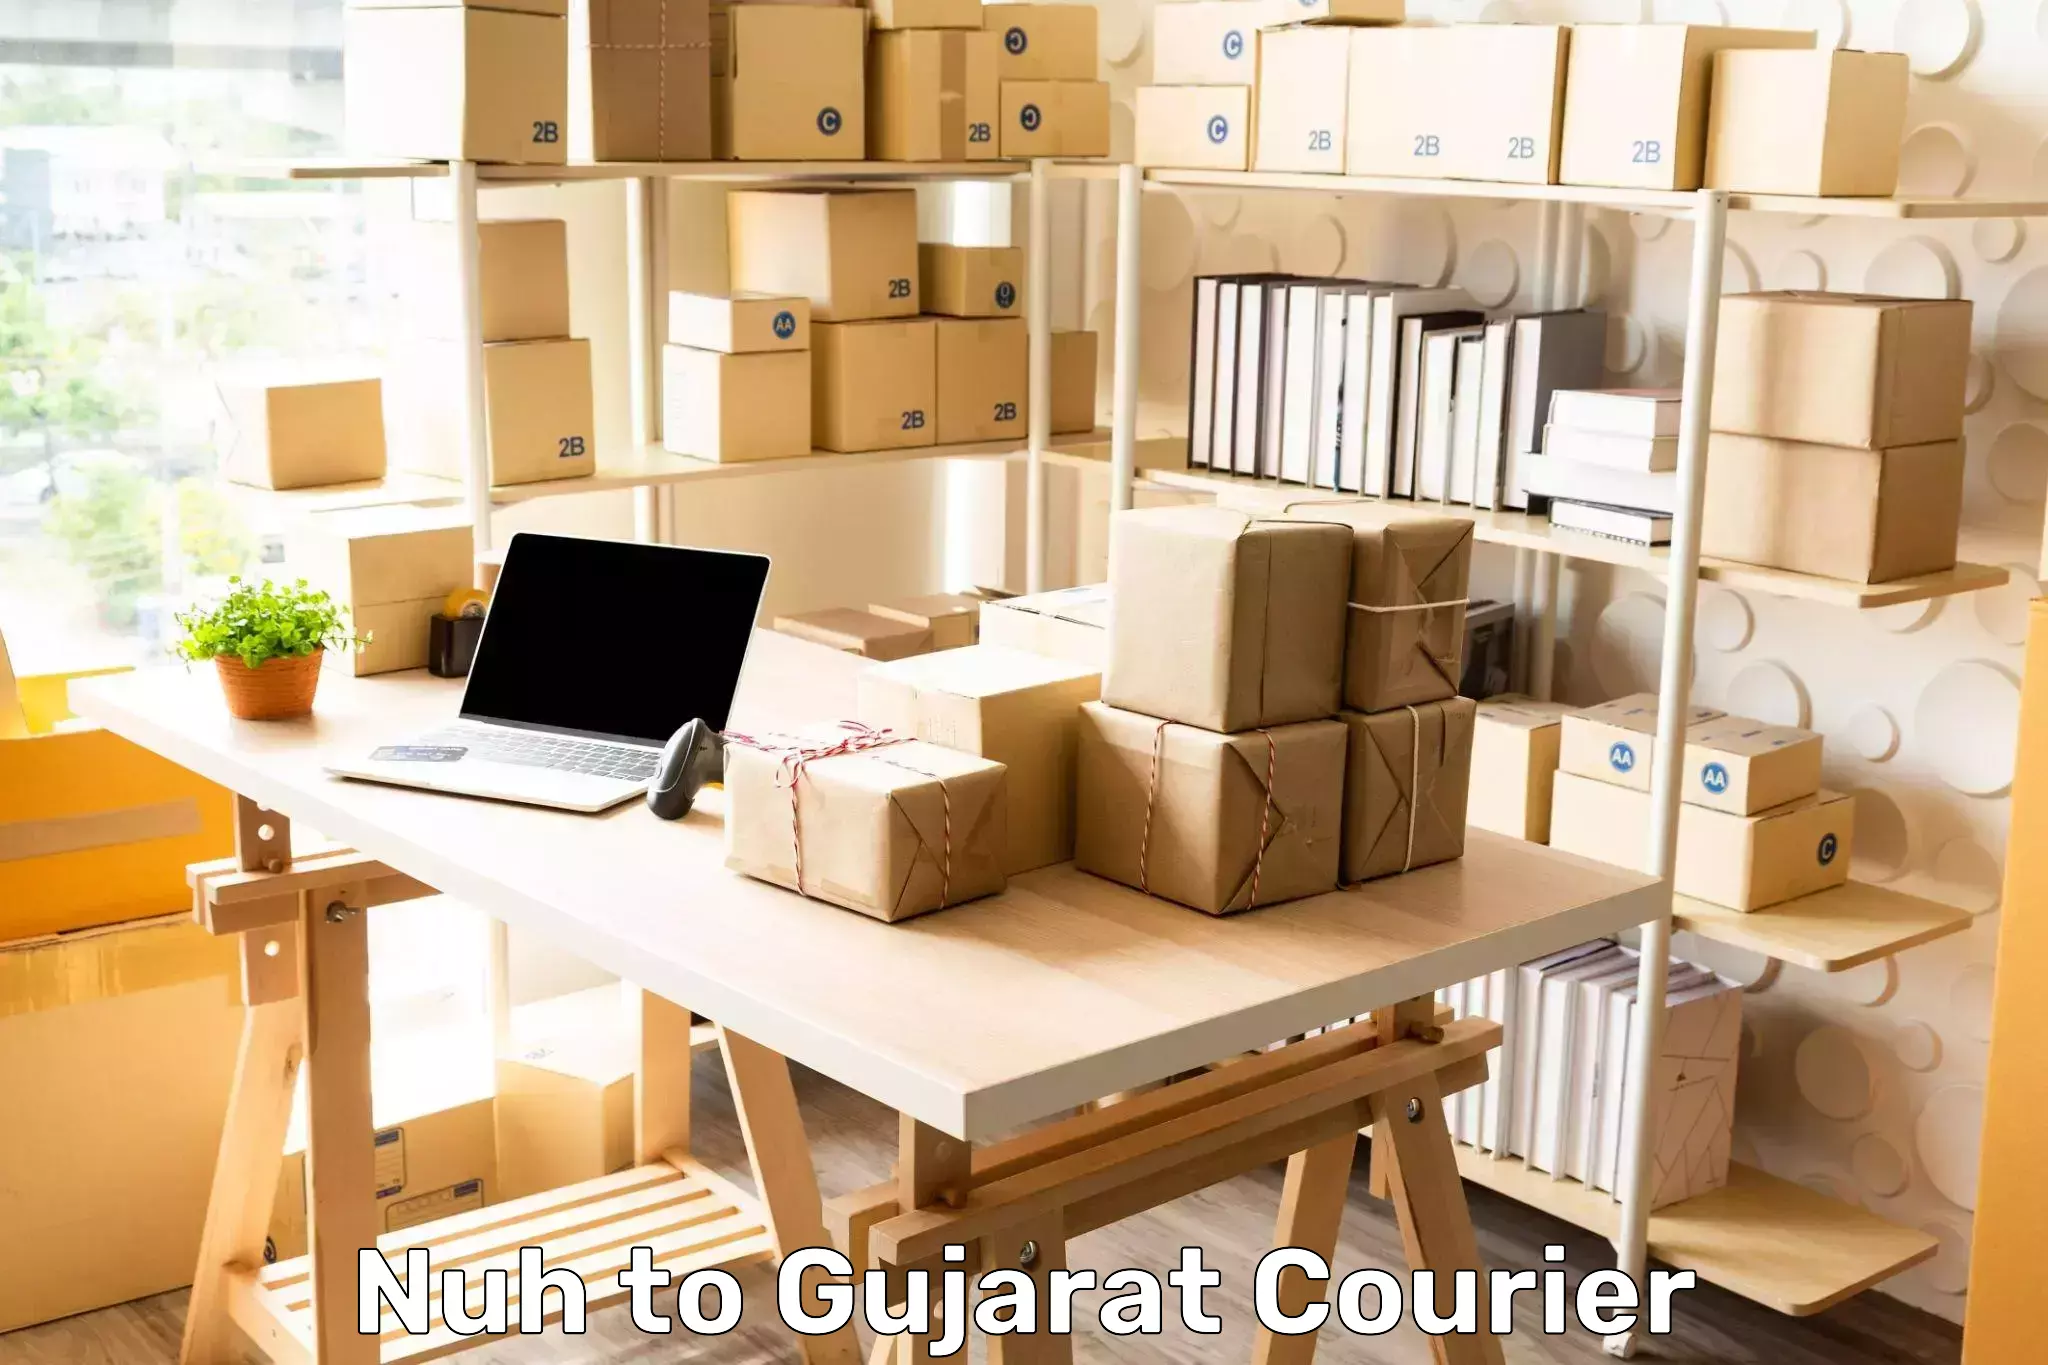 Cash on delivery service Nuh to Gujarat